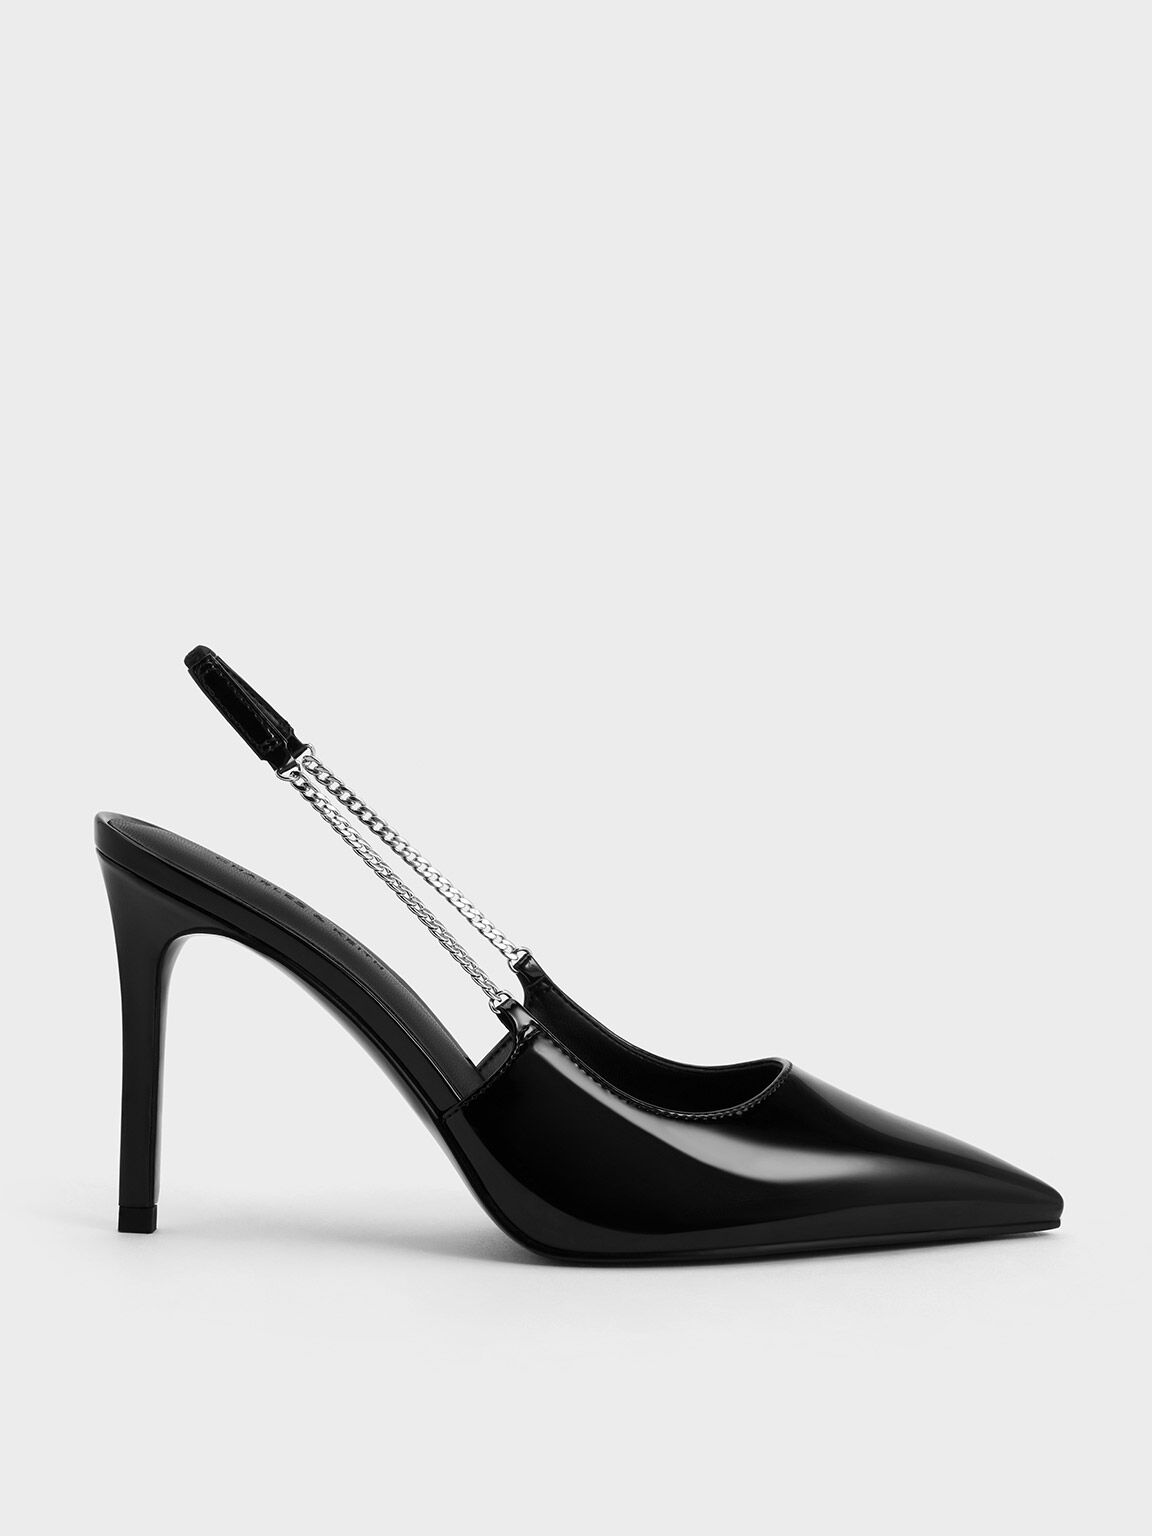 Black Patent Chain-Link Pointed-Toe Slingback Pumps - CHARLES 